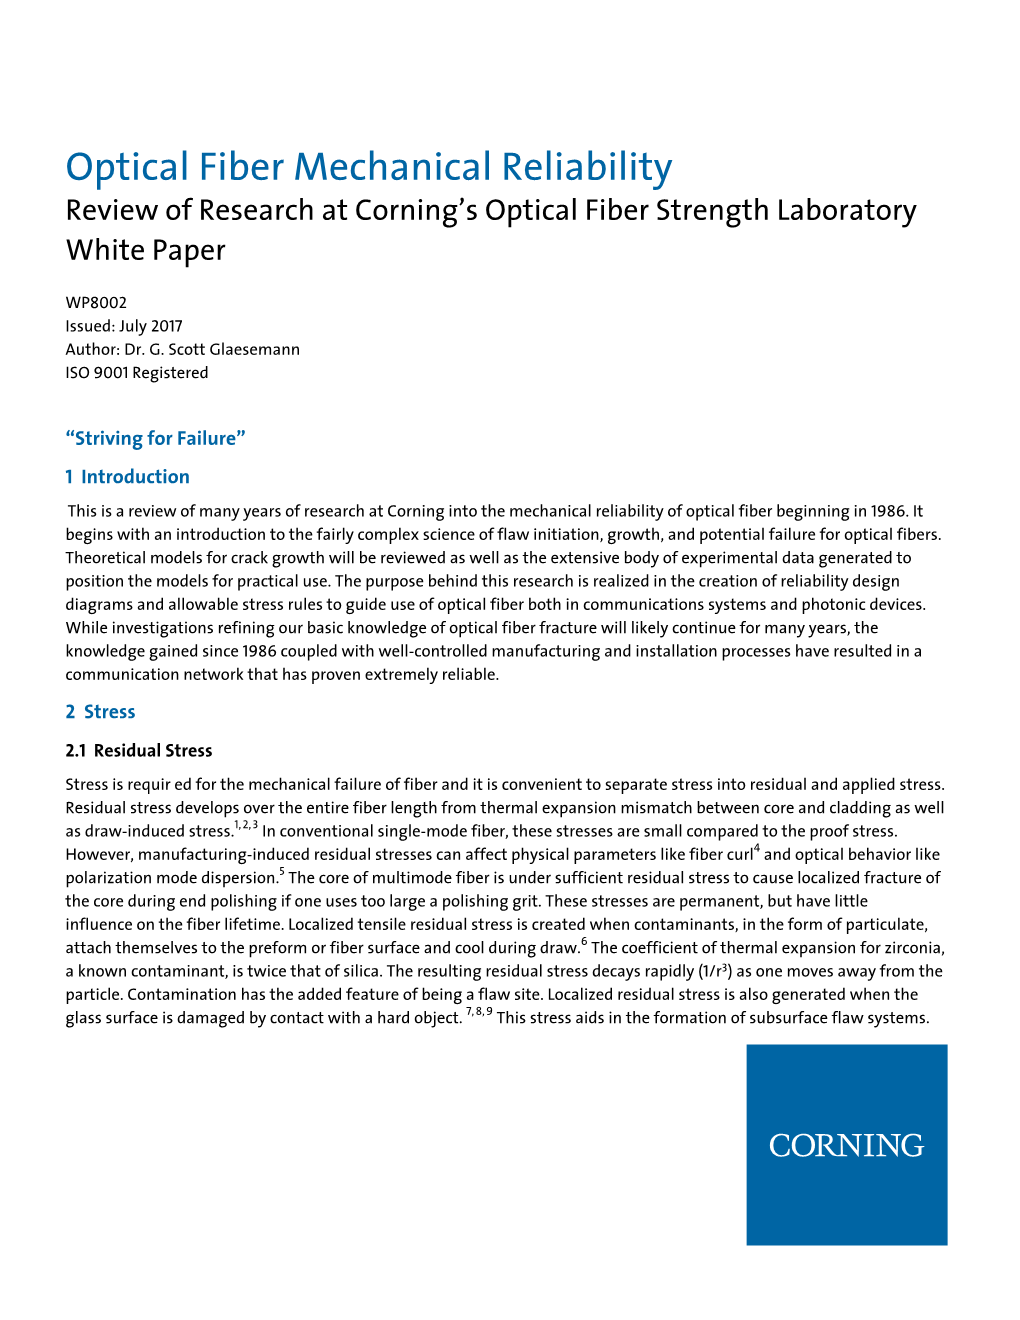 Optical Fiber Mechanical Reliability Review of Research at Corning’S Optical Fiber Strength Laboratory White Paper